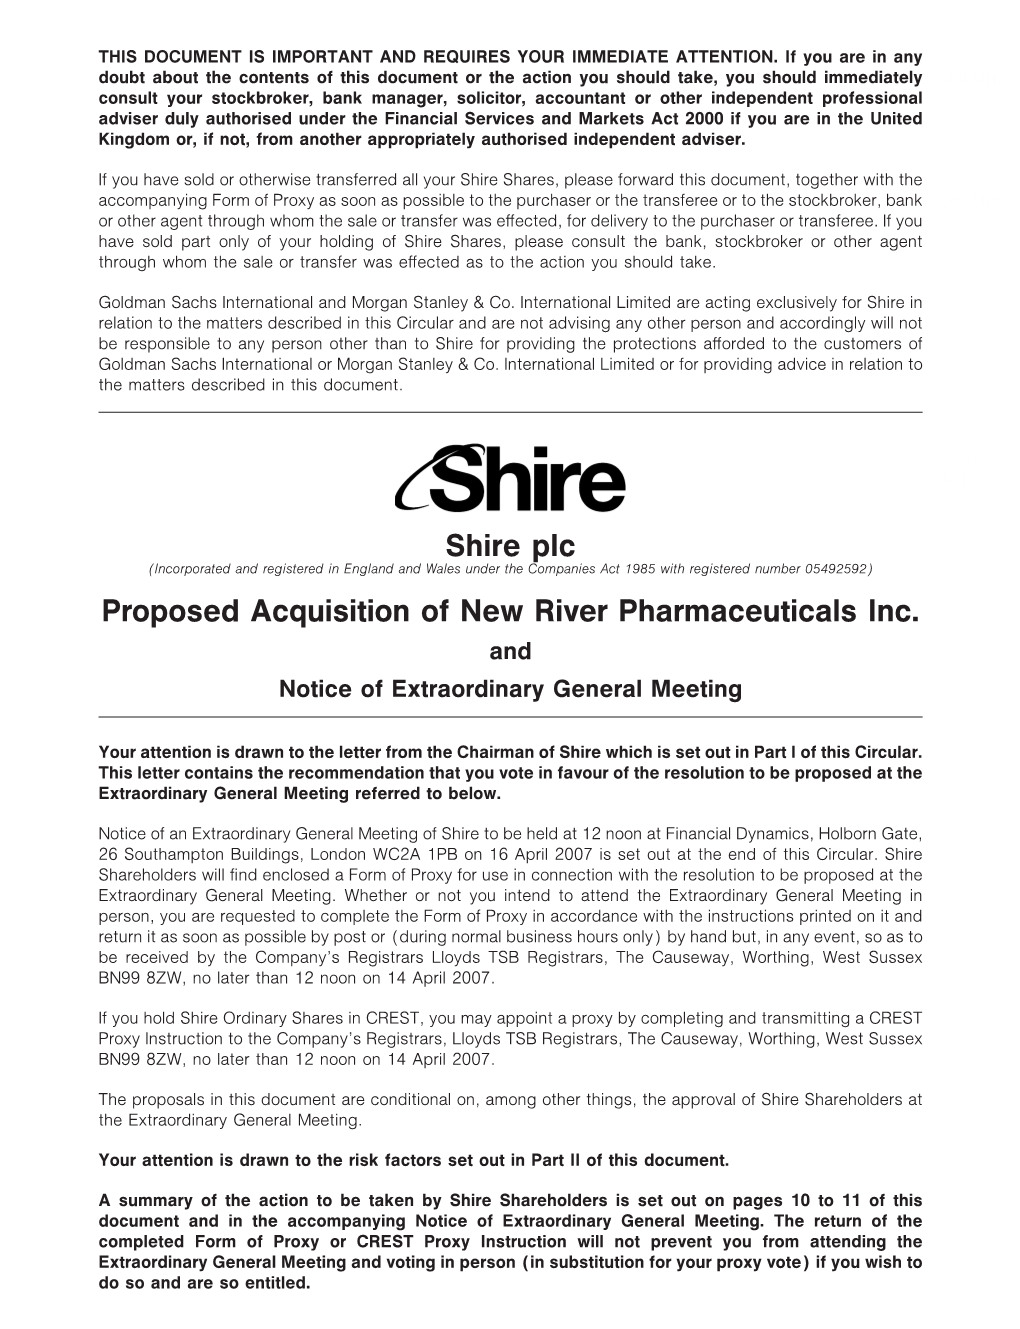 Shire Plc Proposed Acquisition of New River Pharmaceuticals Inc